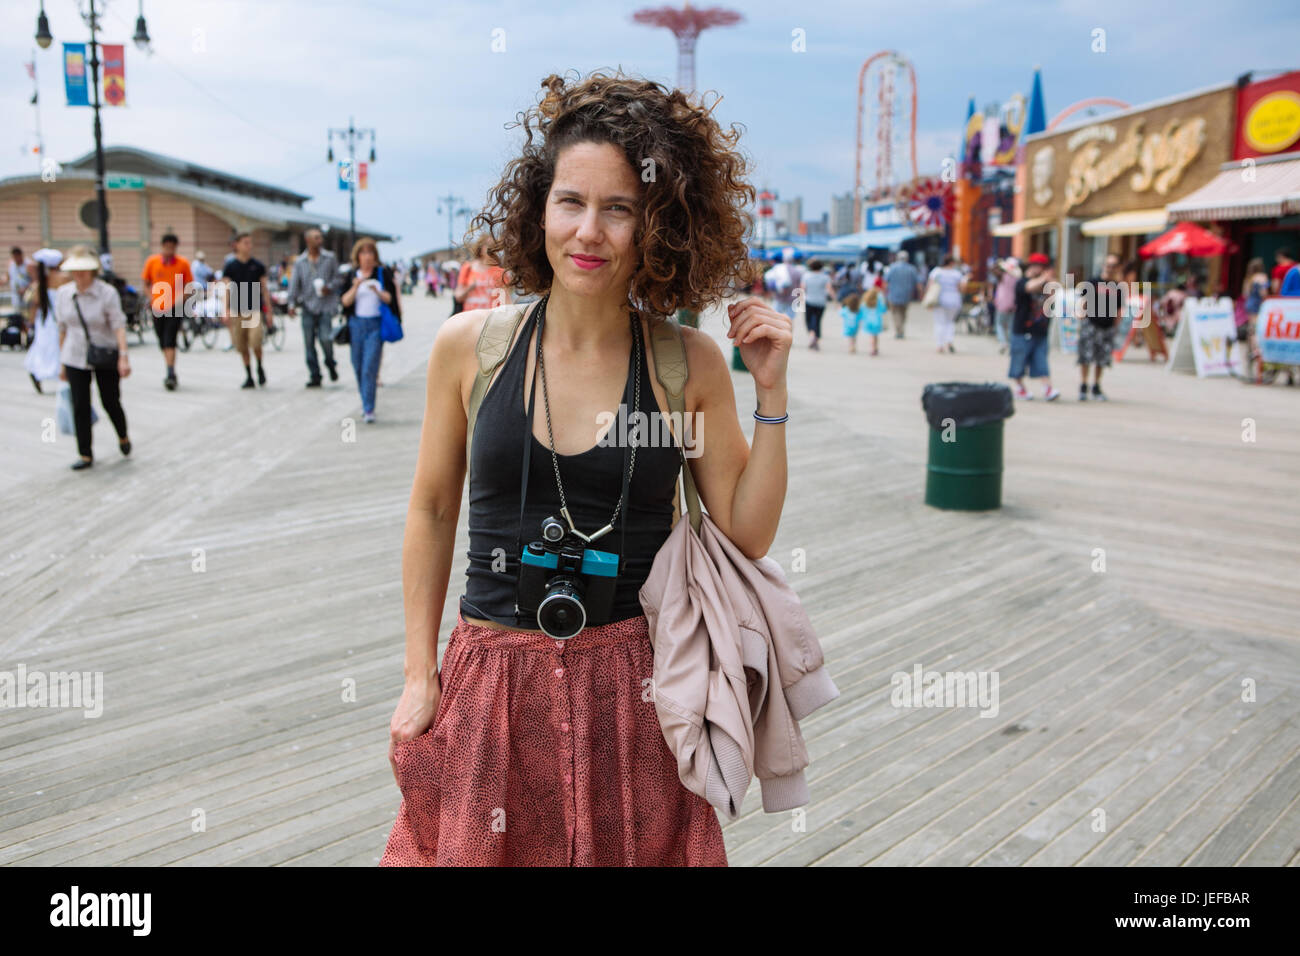 Cool beautiful woman with a Diana Lomography camera holding her neck in Coney Island boardwalk during summer weekend, Brooklyn, USA Stock Photo